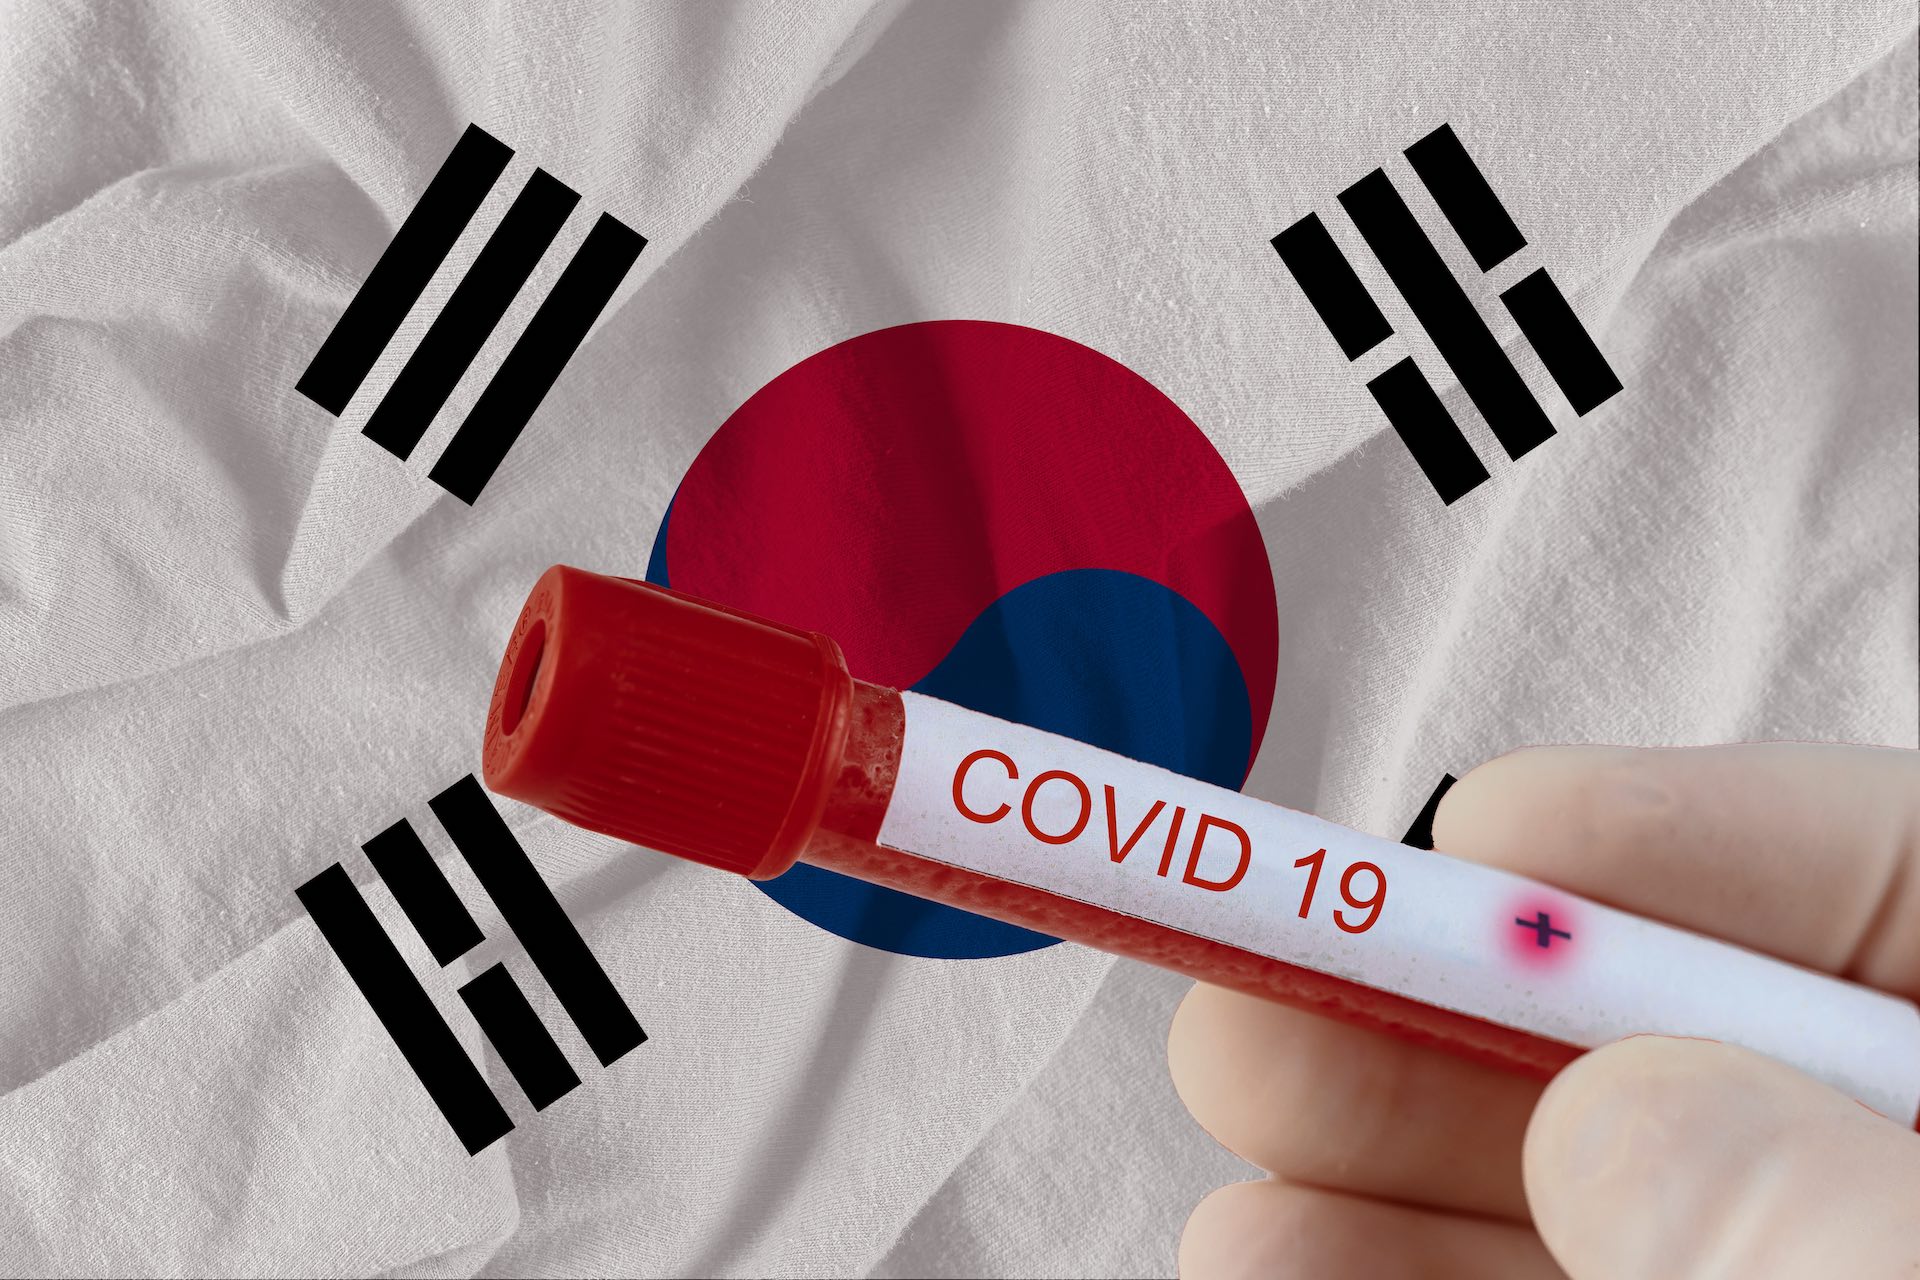 South Korea global COVID-19 hotspot with 2.3 million new cases